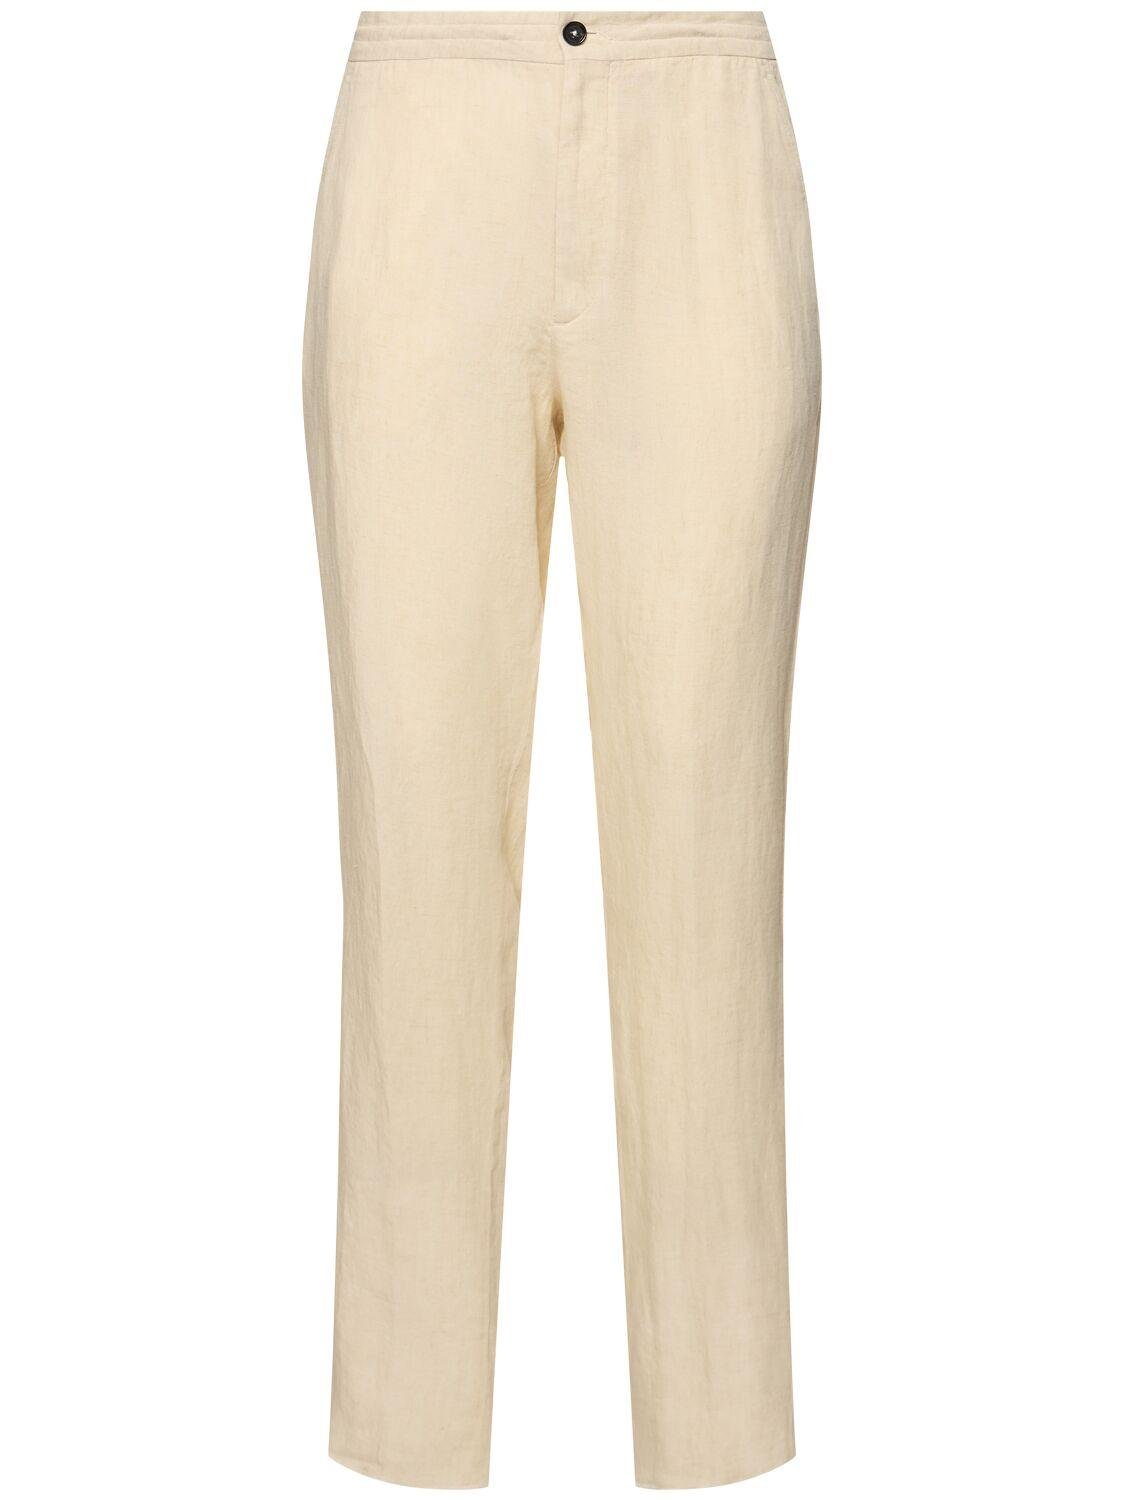 Pure Linen Joggers by ZEGNA